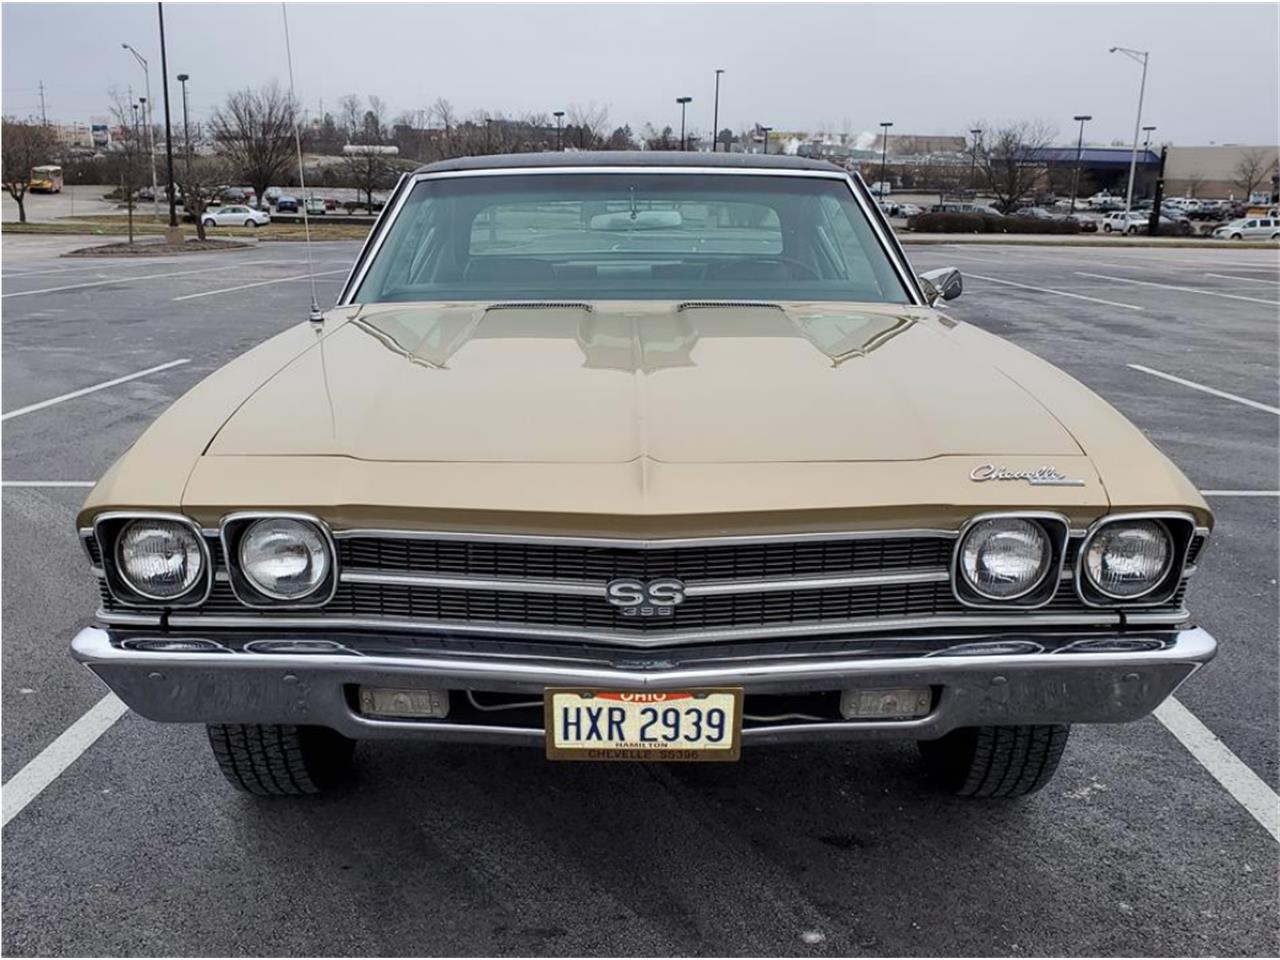 1969 Chevelle, Featured listing: Time For A Change &#8211; 1969 Chevrolet Chevelle, ClassicCars.com Journal